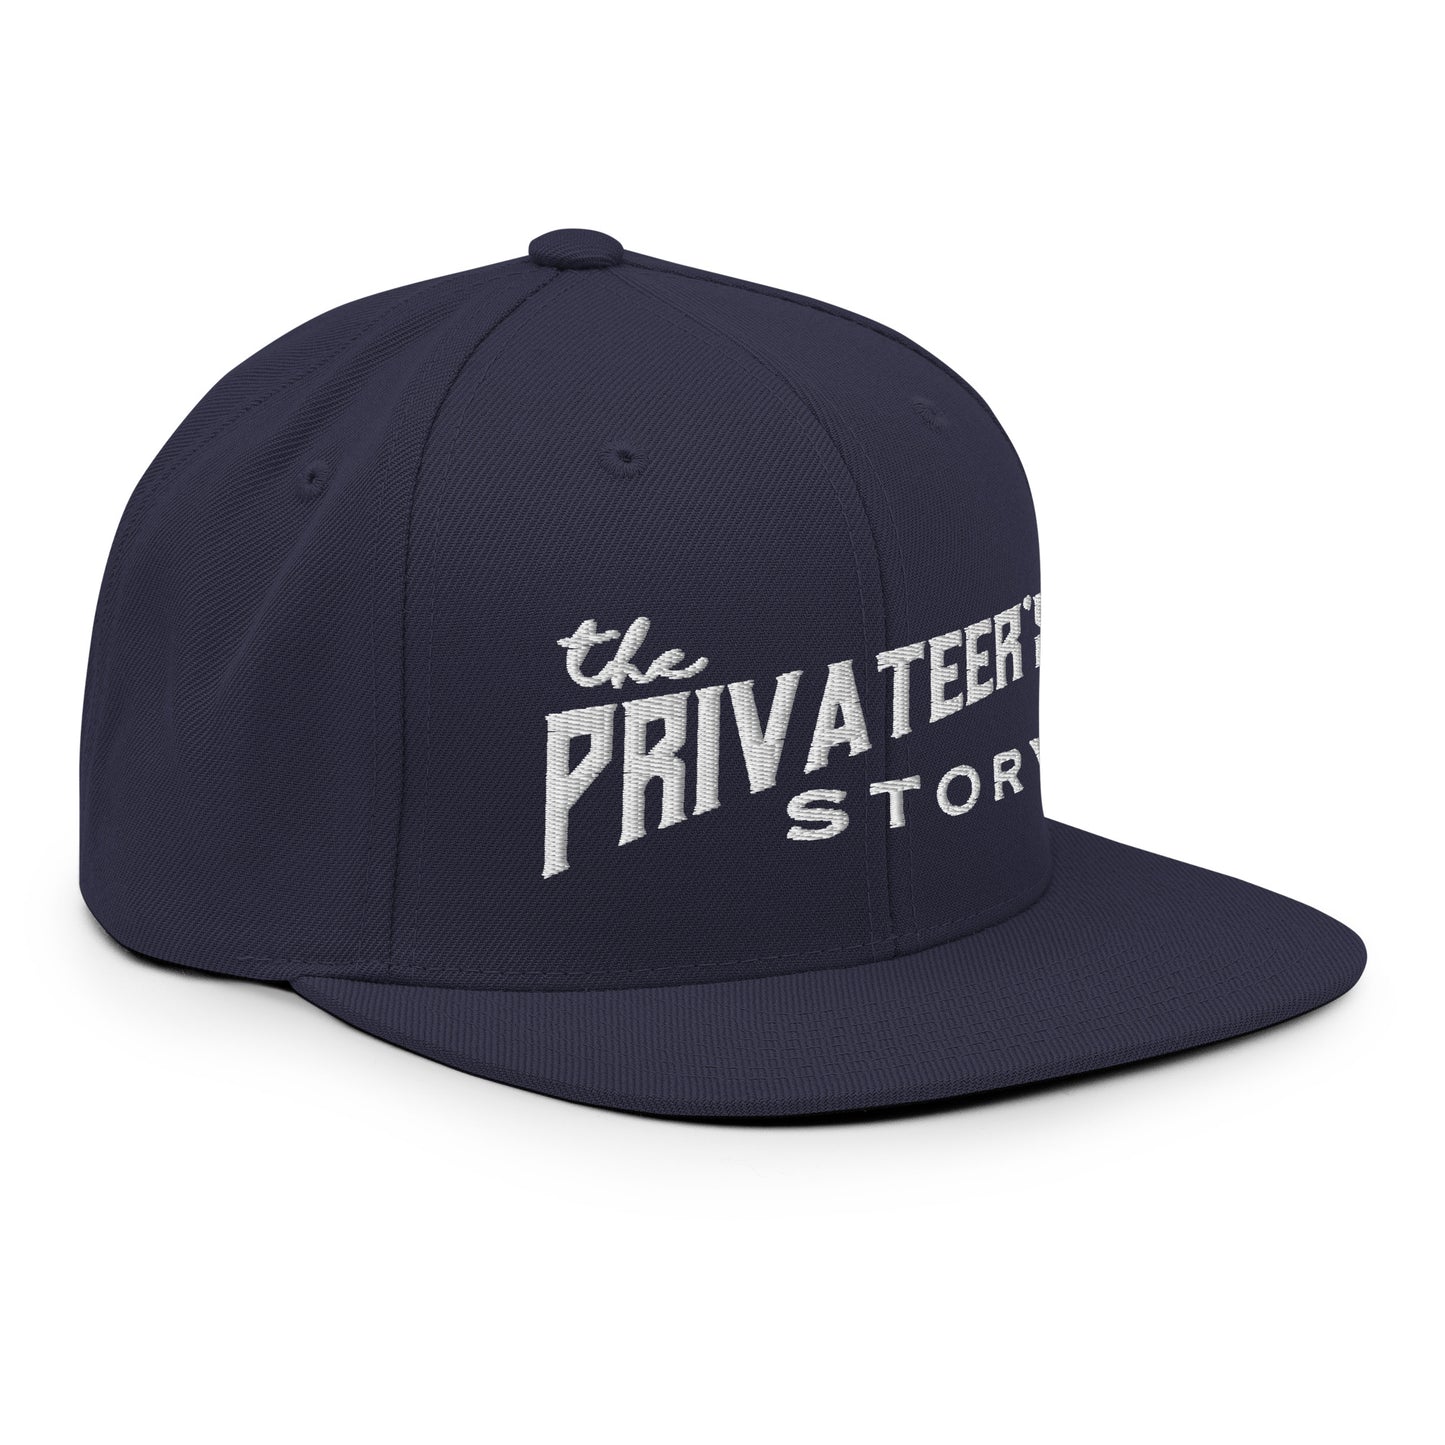 The Privateers Story Snapback Hat